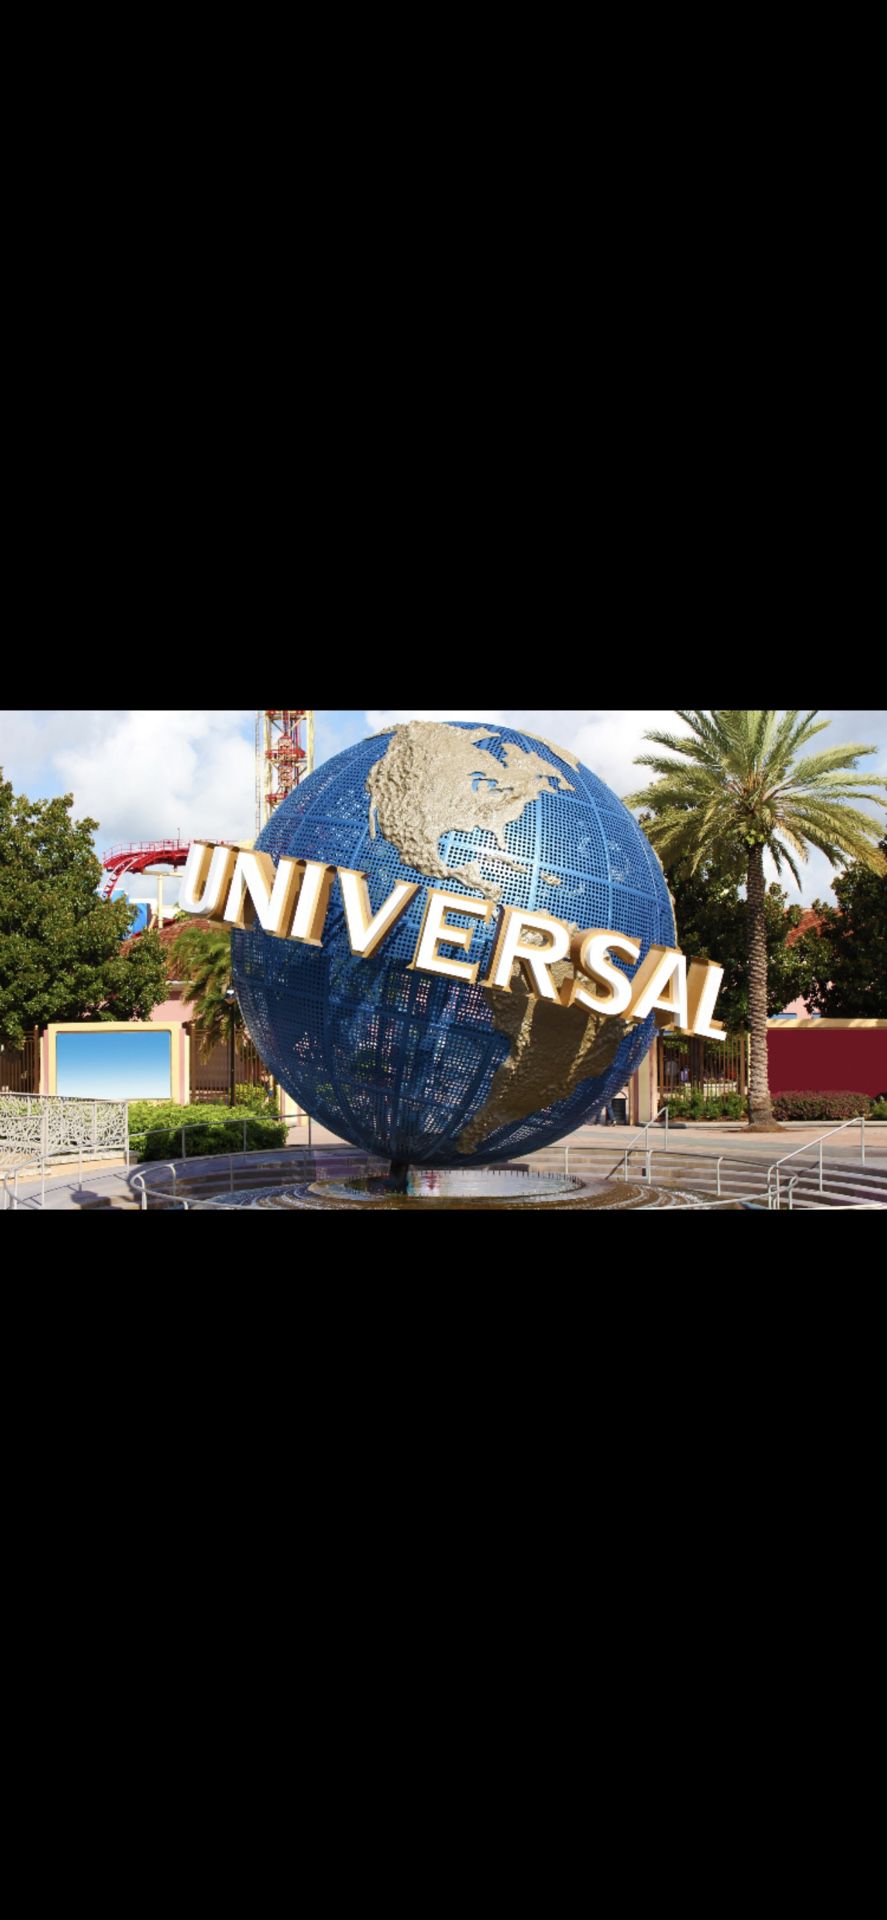 Universal tickets 2 for 70 specials only for today cashapp only lmk only real buyers only